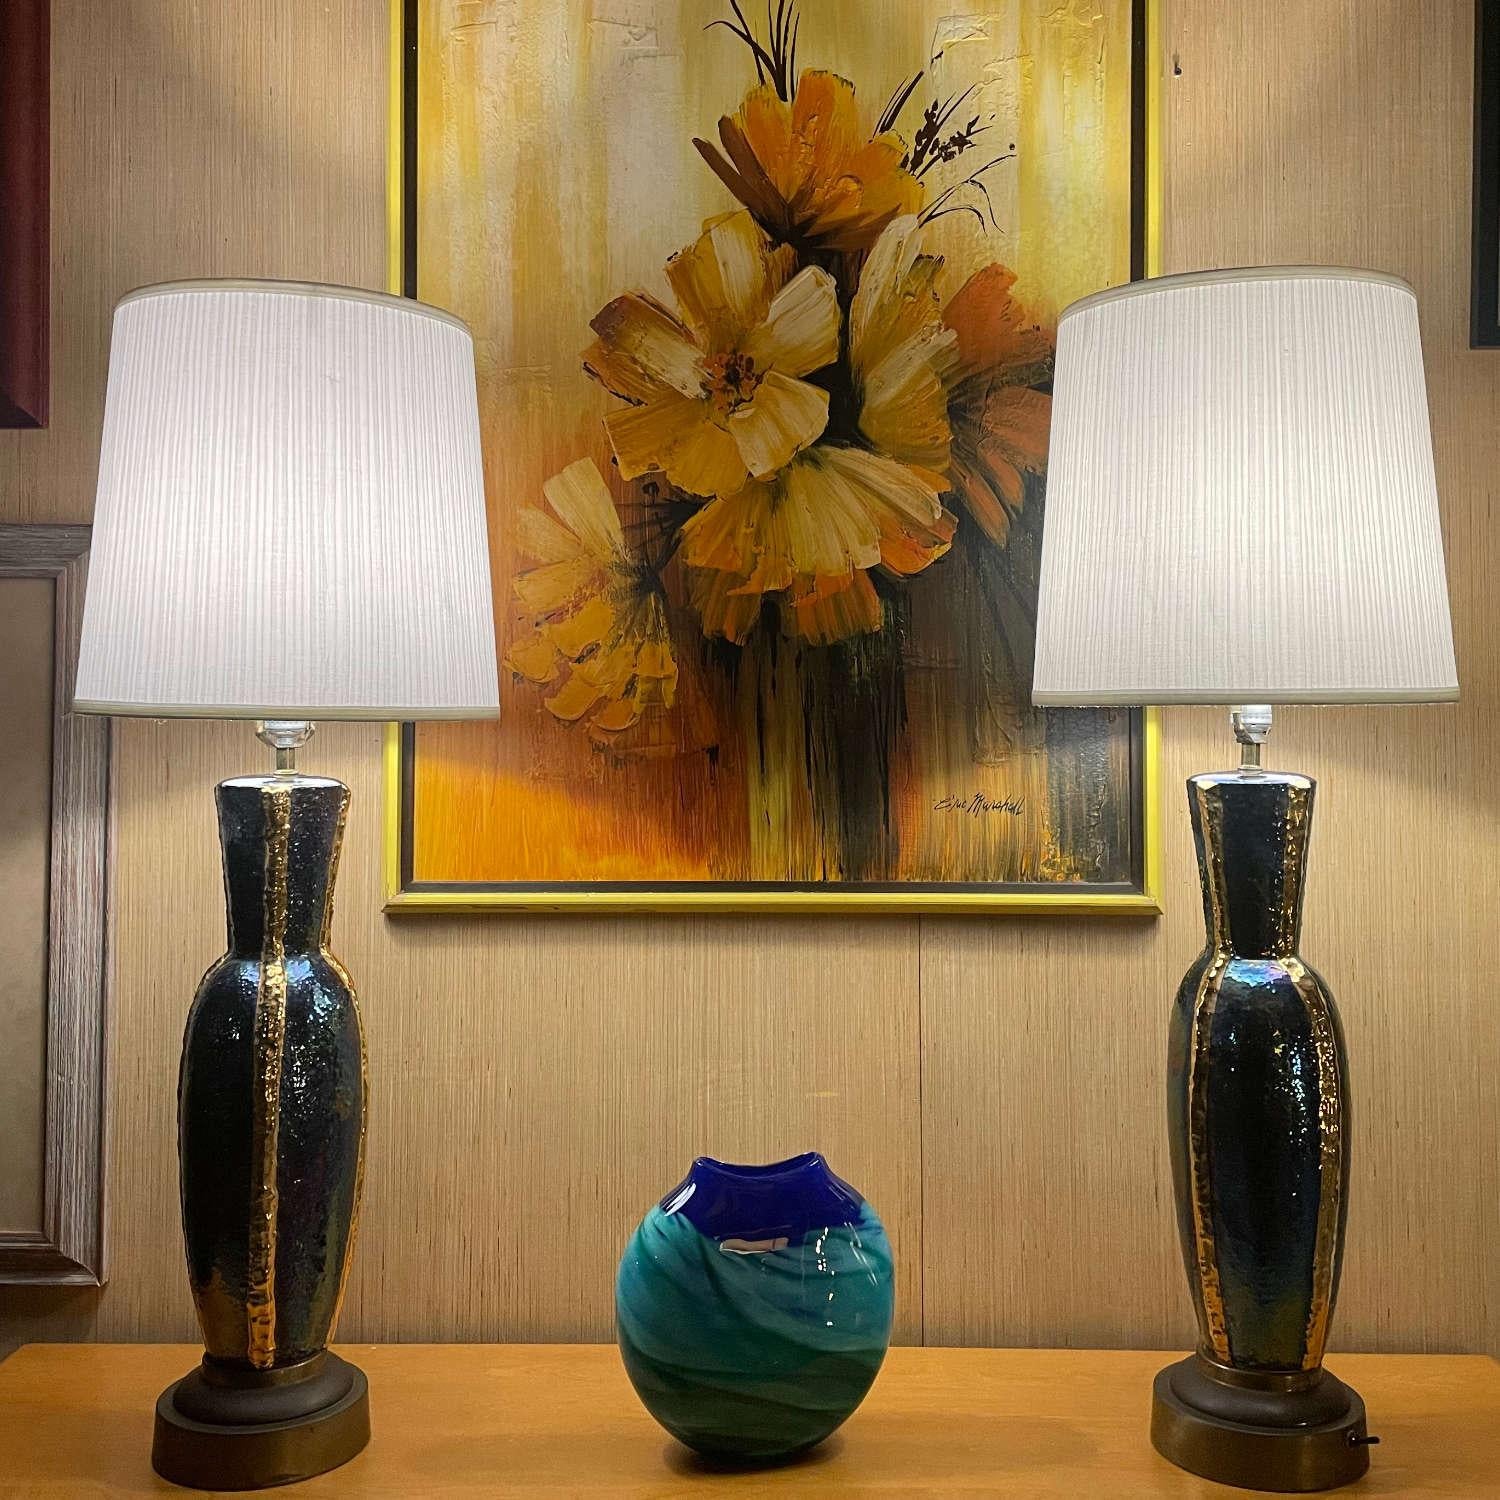 Pair of blue and gold iridescent Mid-Century Modern table lamps. The elegant lamps appear to change color as light plays with the ceramic glaze. Metallic gold bands run vertically through out the urn shaped lamps. There is a single bulb at top of